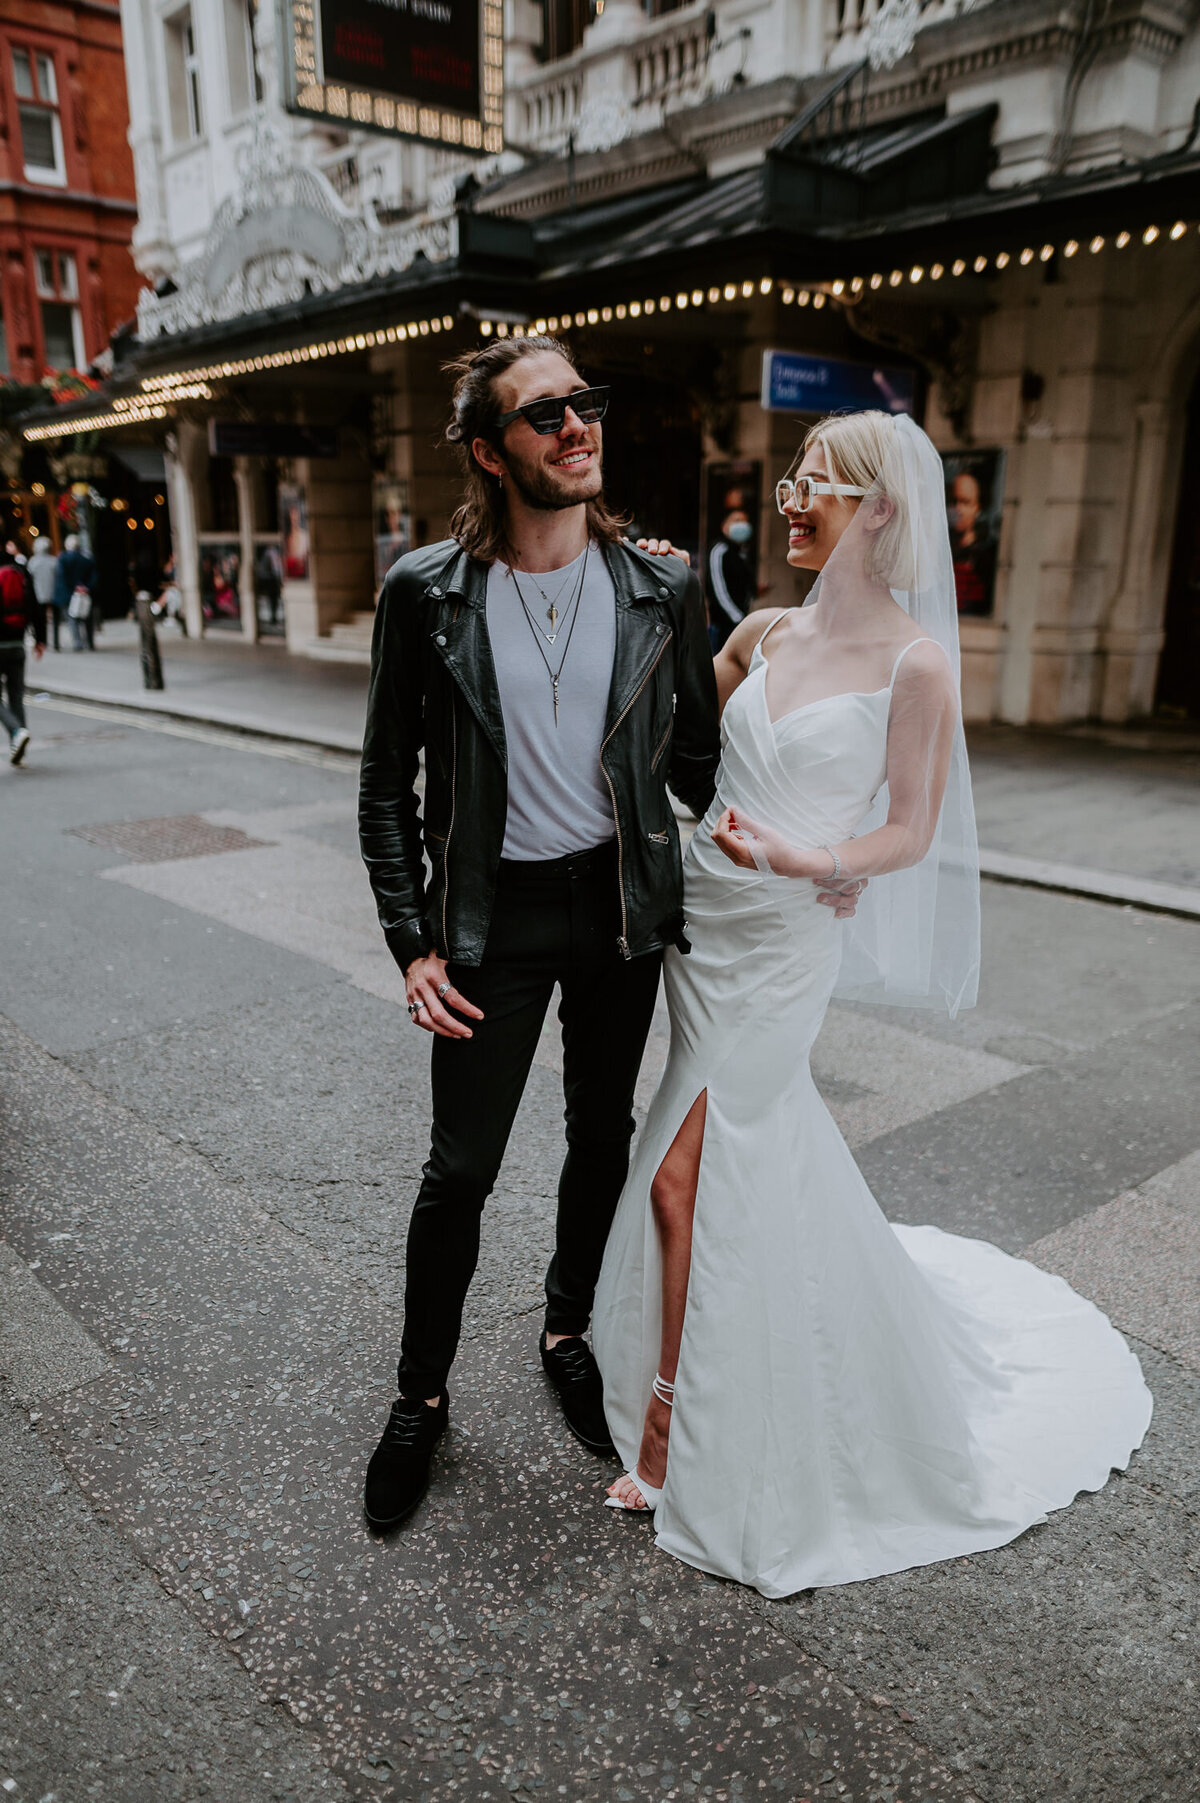 A bride and groom stand in the west end of London outside a theatre. The groom is wearing glasses, has long hair and is also wearing a leather jacket. The bride is also wearing sun glasses and has a wedding dress on designed by Justin Alexander.